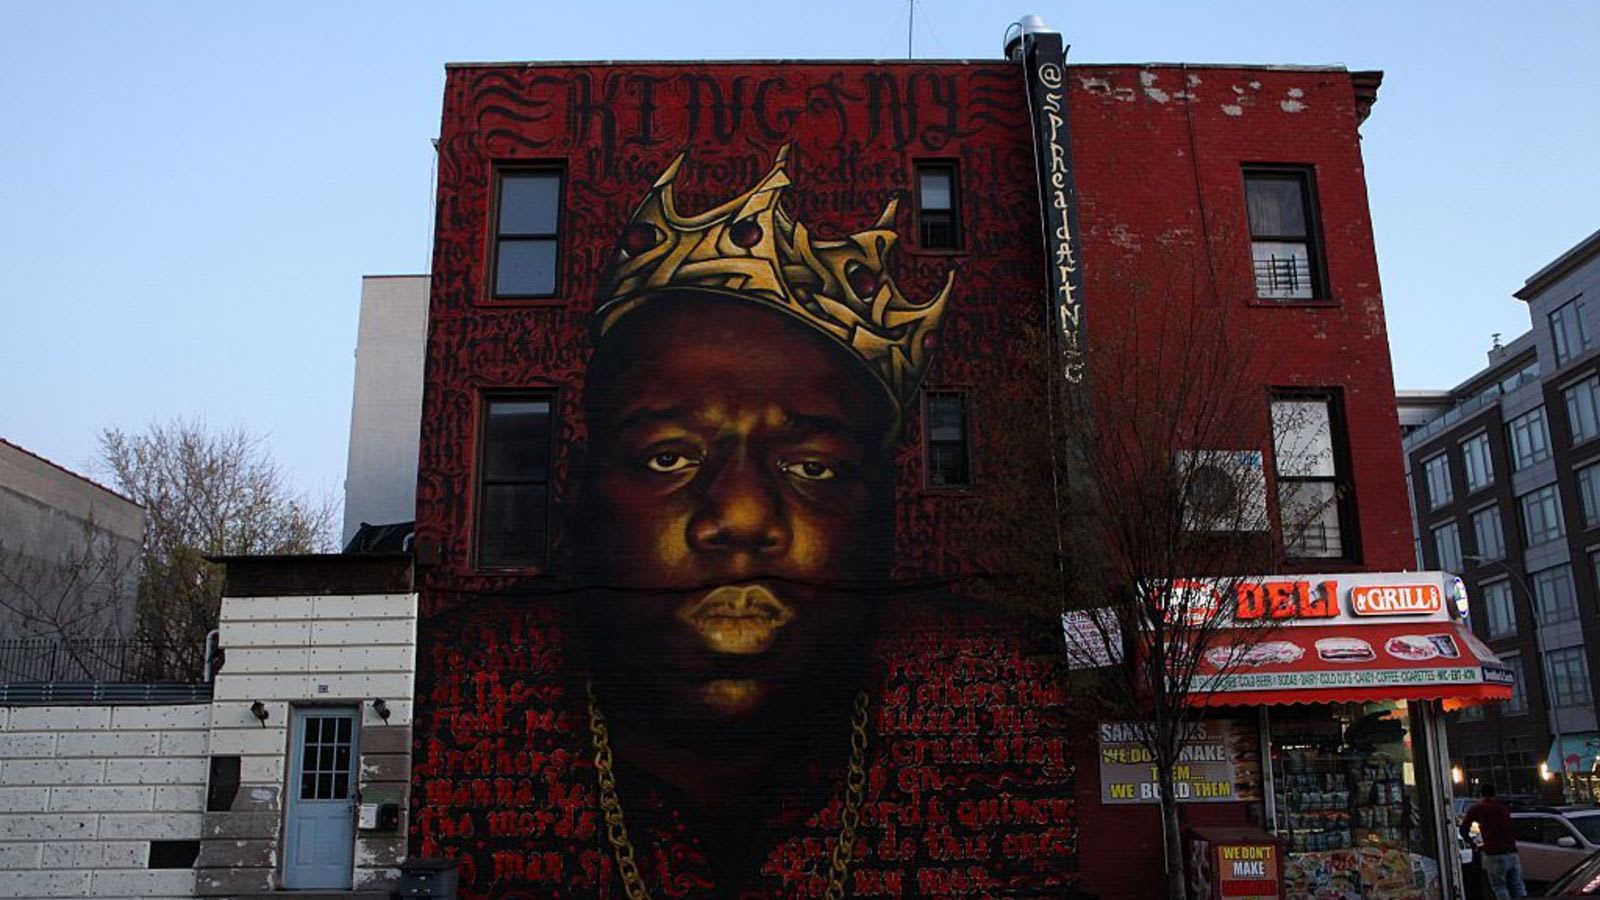 20 musical acts influenced by the Notorious B.I.G.